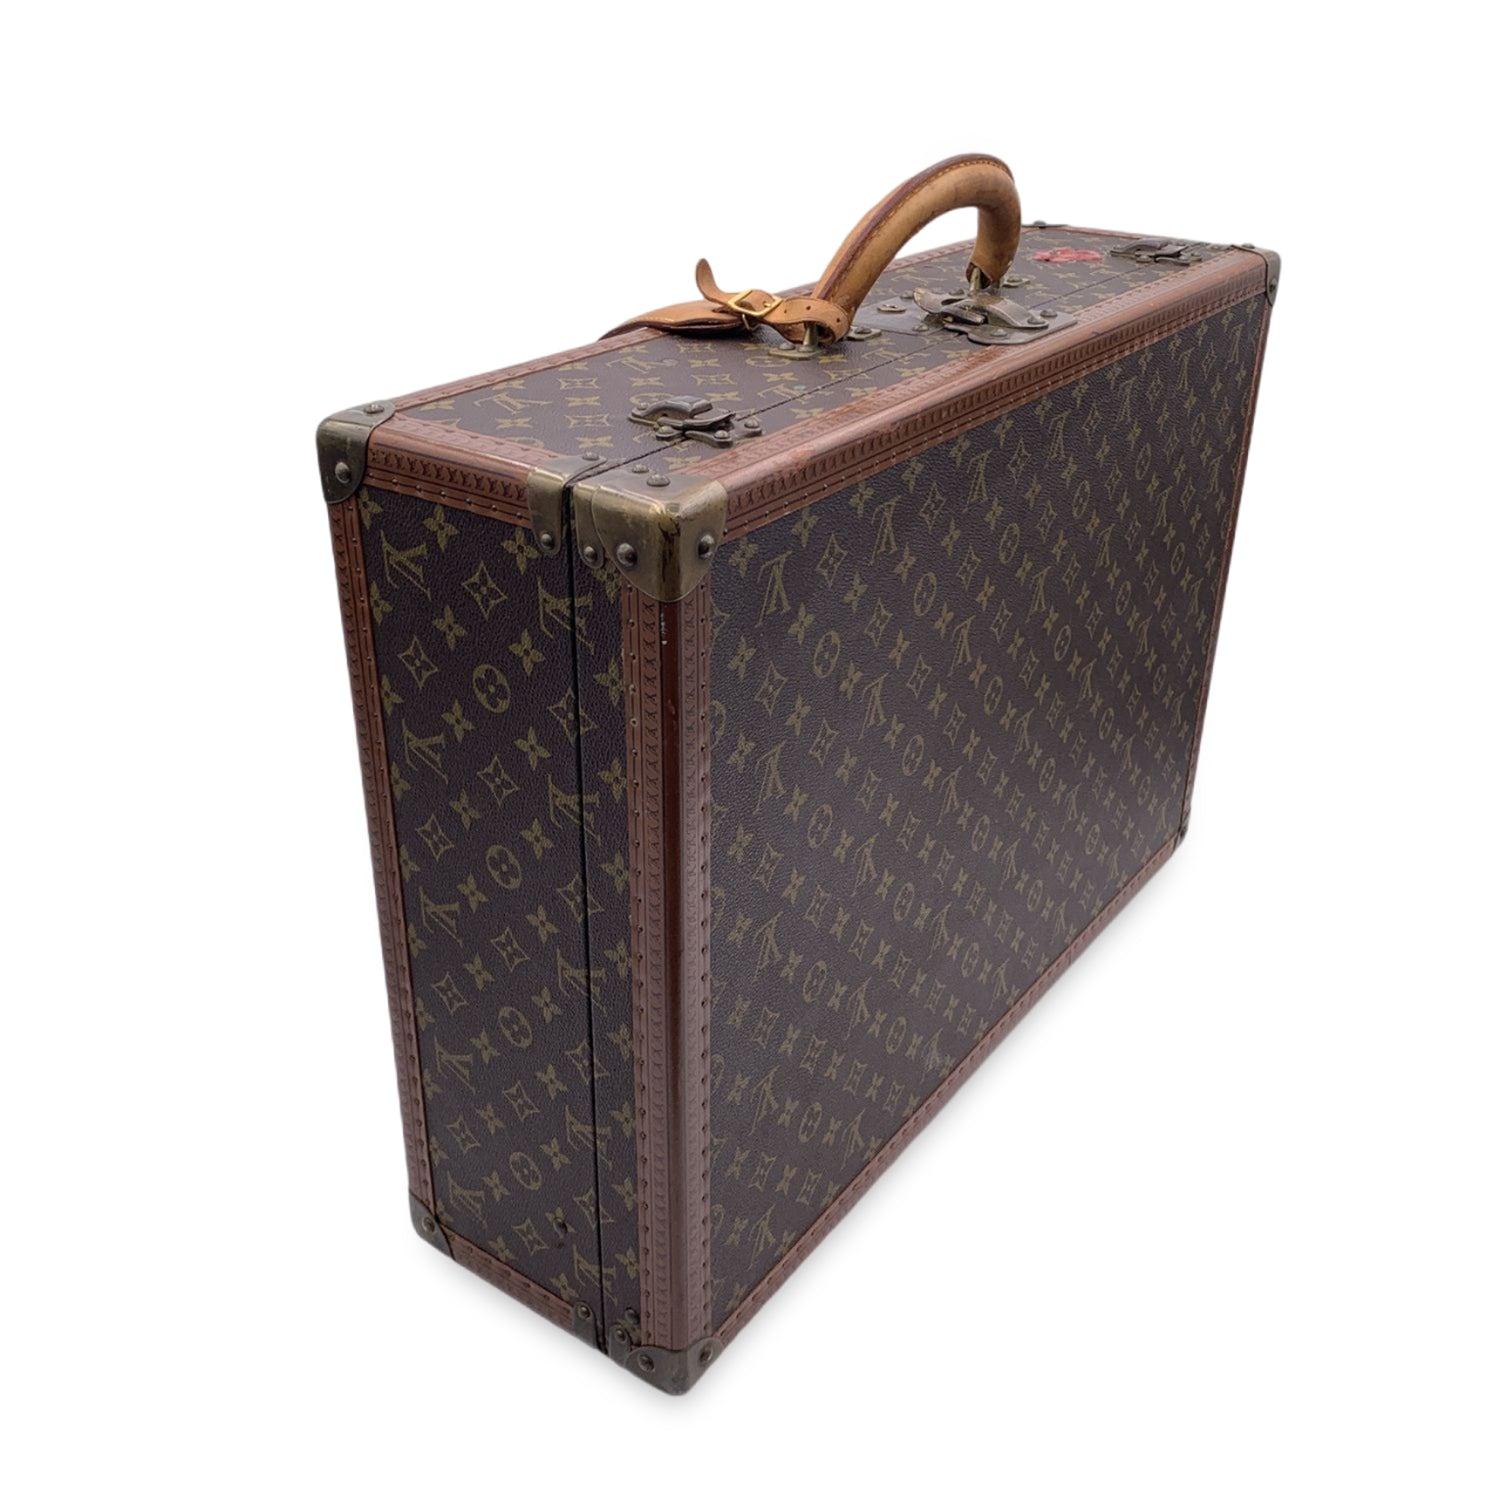 LOUIS VUITTON vintage Monogram Bisten 60 Suitcase, mod. M21326. A part of Louis Vuitton history, ideal for travel or for home or office decor. Monogram canvas. LV monograms embossed on trim. Rounded leather handle. Leather ID tag included. Canvas